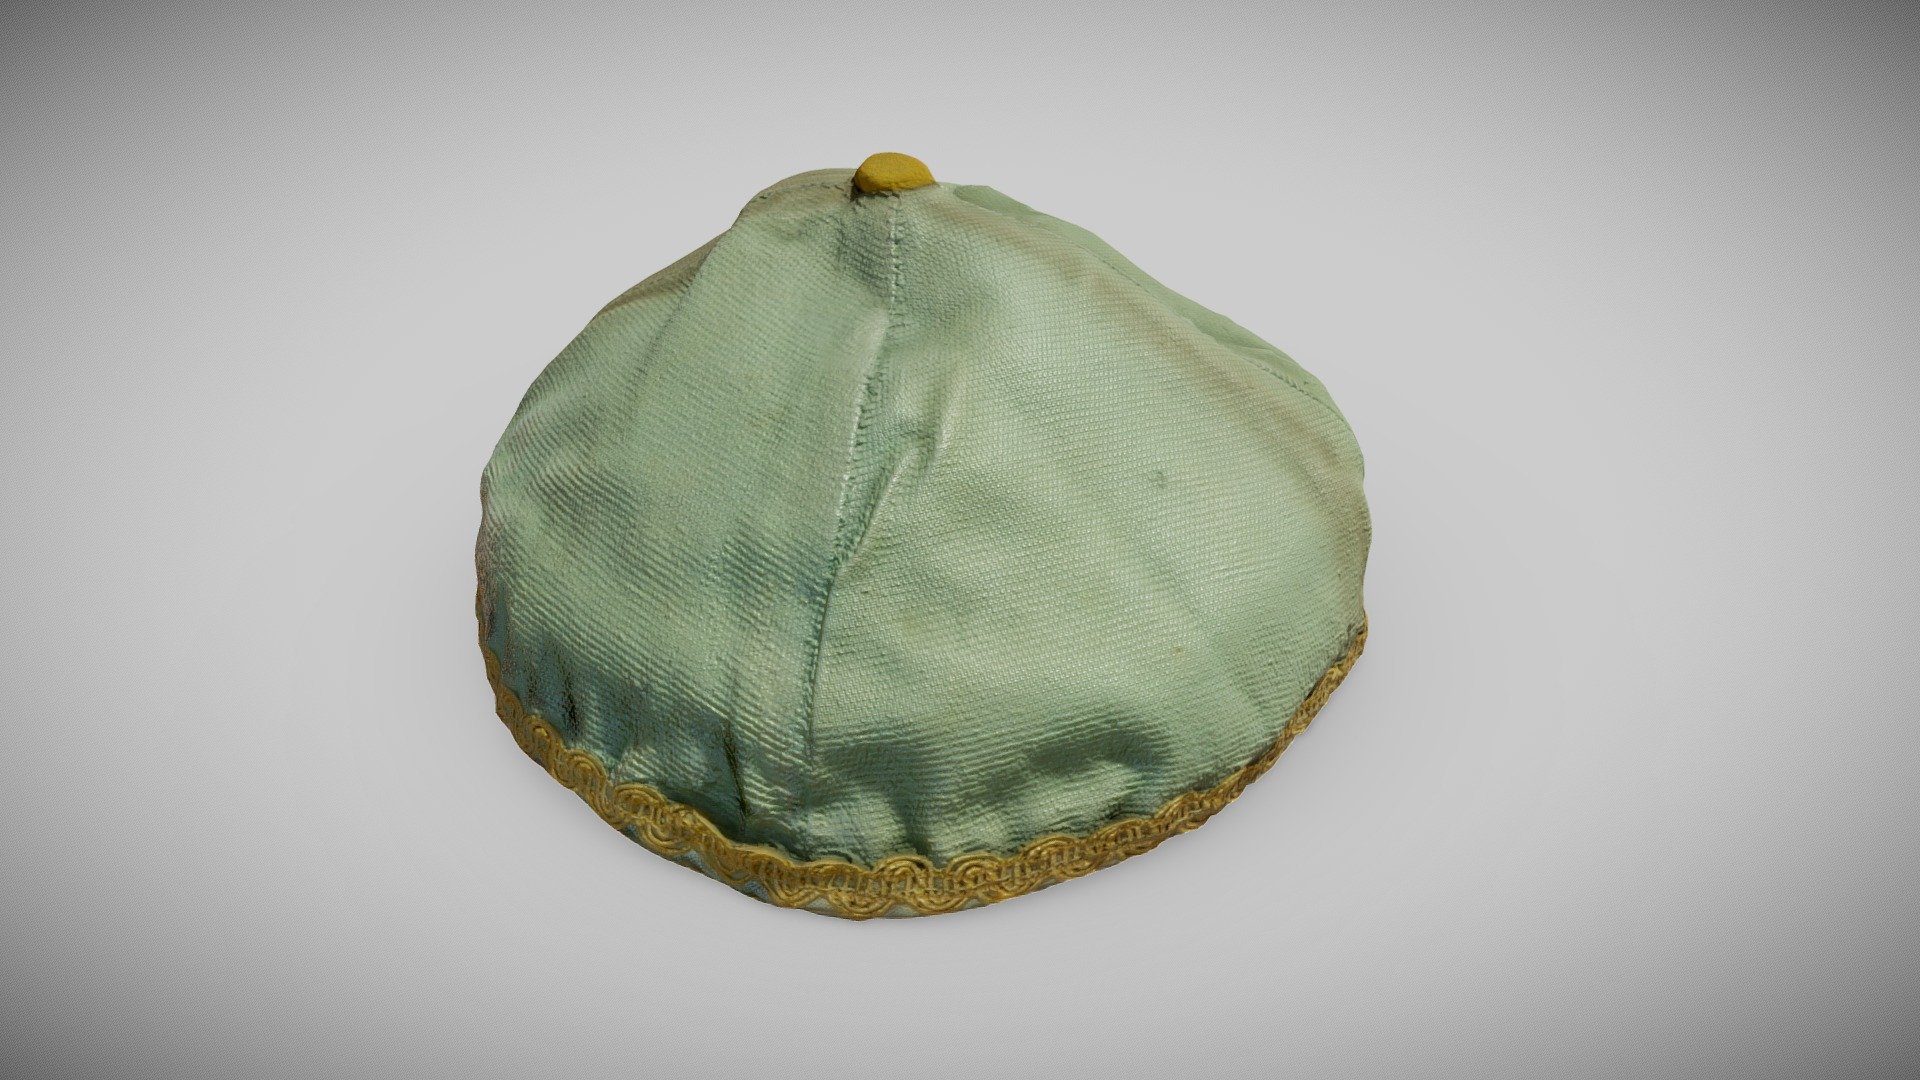 Full name: Green kippah from the house of Szymon Kluger in Oświęcim, Poland

Known as a kippah or a yarmulke, it seems to be the most universally recognised symbol of Jewish religiosity and culture.  What is the origin of the custom of wearing this small brimless skullcap by Jewish men atop their head? The practice of covering only the crown of one’s head is not rooted in any Biblical or Talmudic precepts. Instead, its foundation lies in the description of the clothes of a high priest (Exodus 28:4, 36-39) or in the traditional headwear of Talmudic scholars in Babylonia. 

For more images and further information, visit: https://muzea.malopolska.pl/en/objects-list/3004

Inventory numer: MZ-334-O

Localisation of the physical object: Auschwitz Jewish Center, Oświęcim, Poland  

Digitalisation: Regional Digitalisation Lab, Małopolska Institute of Culture in Kraków, Poland; “Virtual Museums of Małopolska” project - Green kippah from the house of Szymon Kluger - Download Free 3D model by Virtual Museums of Małopolska (@WirtualneMuzeaMalopolski) 3d model